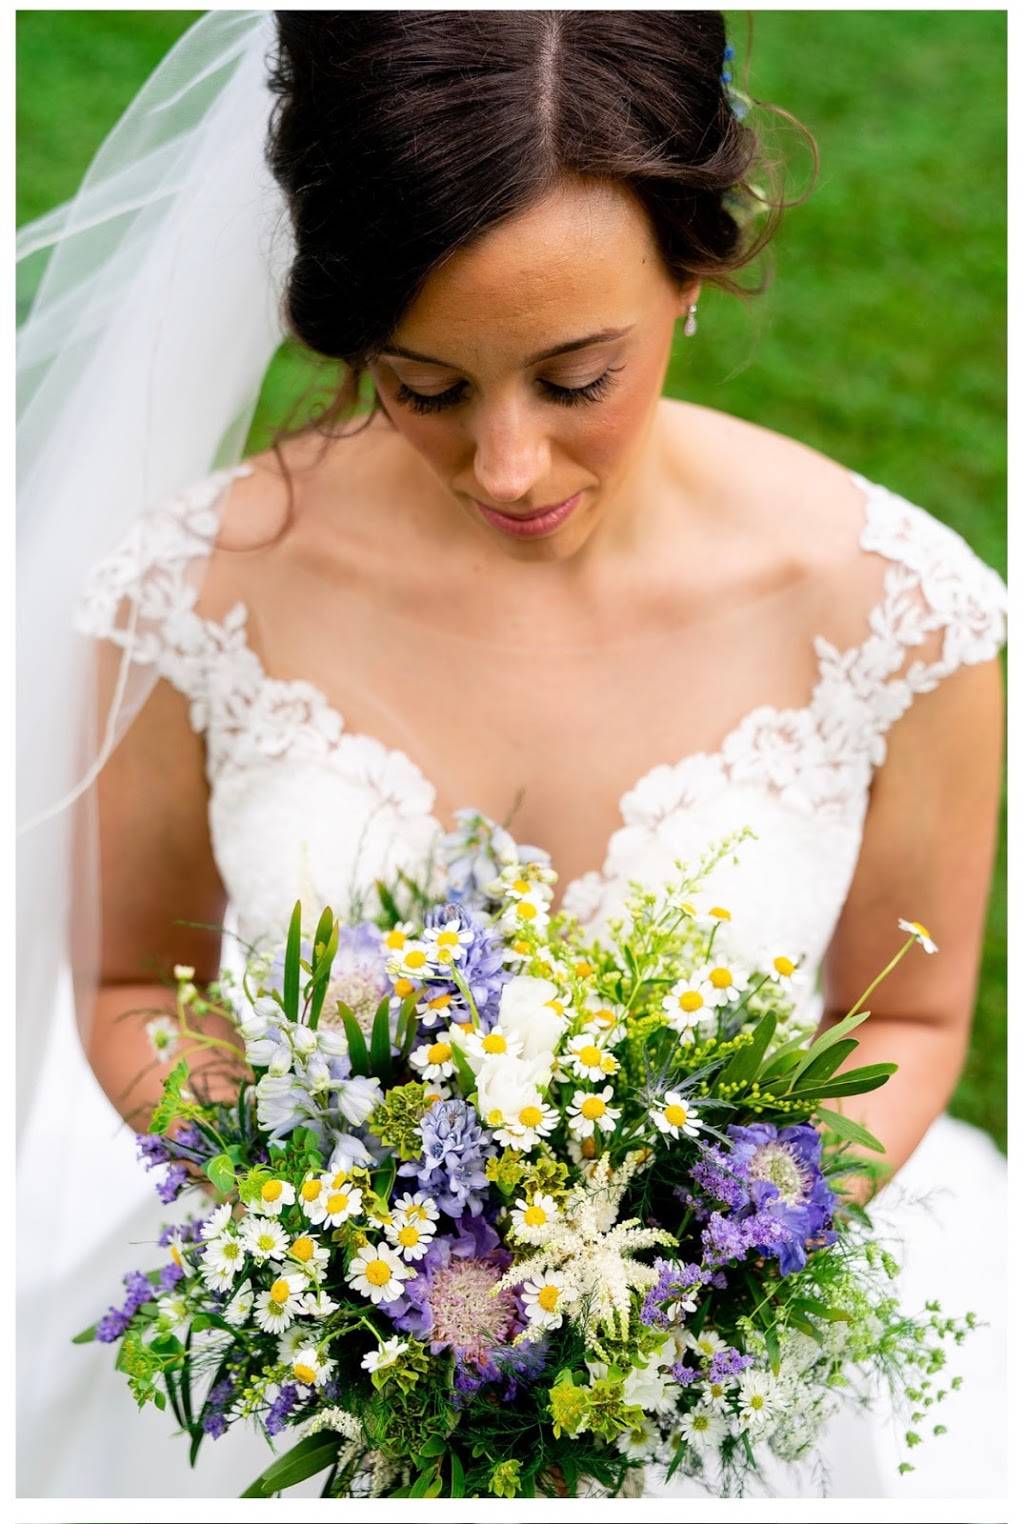 Perry Hall Florist | 4401 E Joppa Rd, Perry Hall, MD 21128, USA | Phone: (410) 256-5588